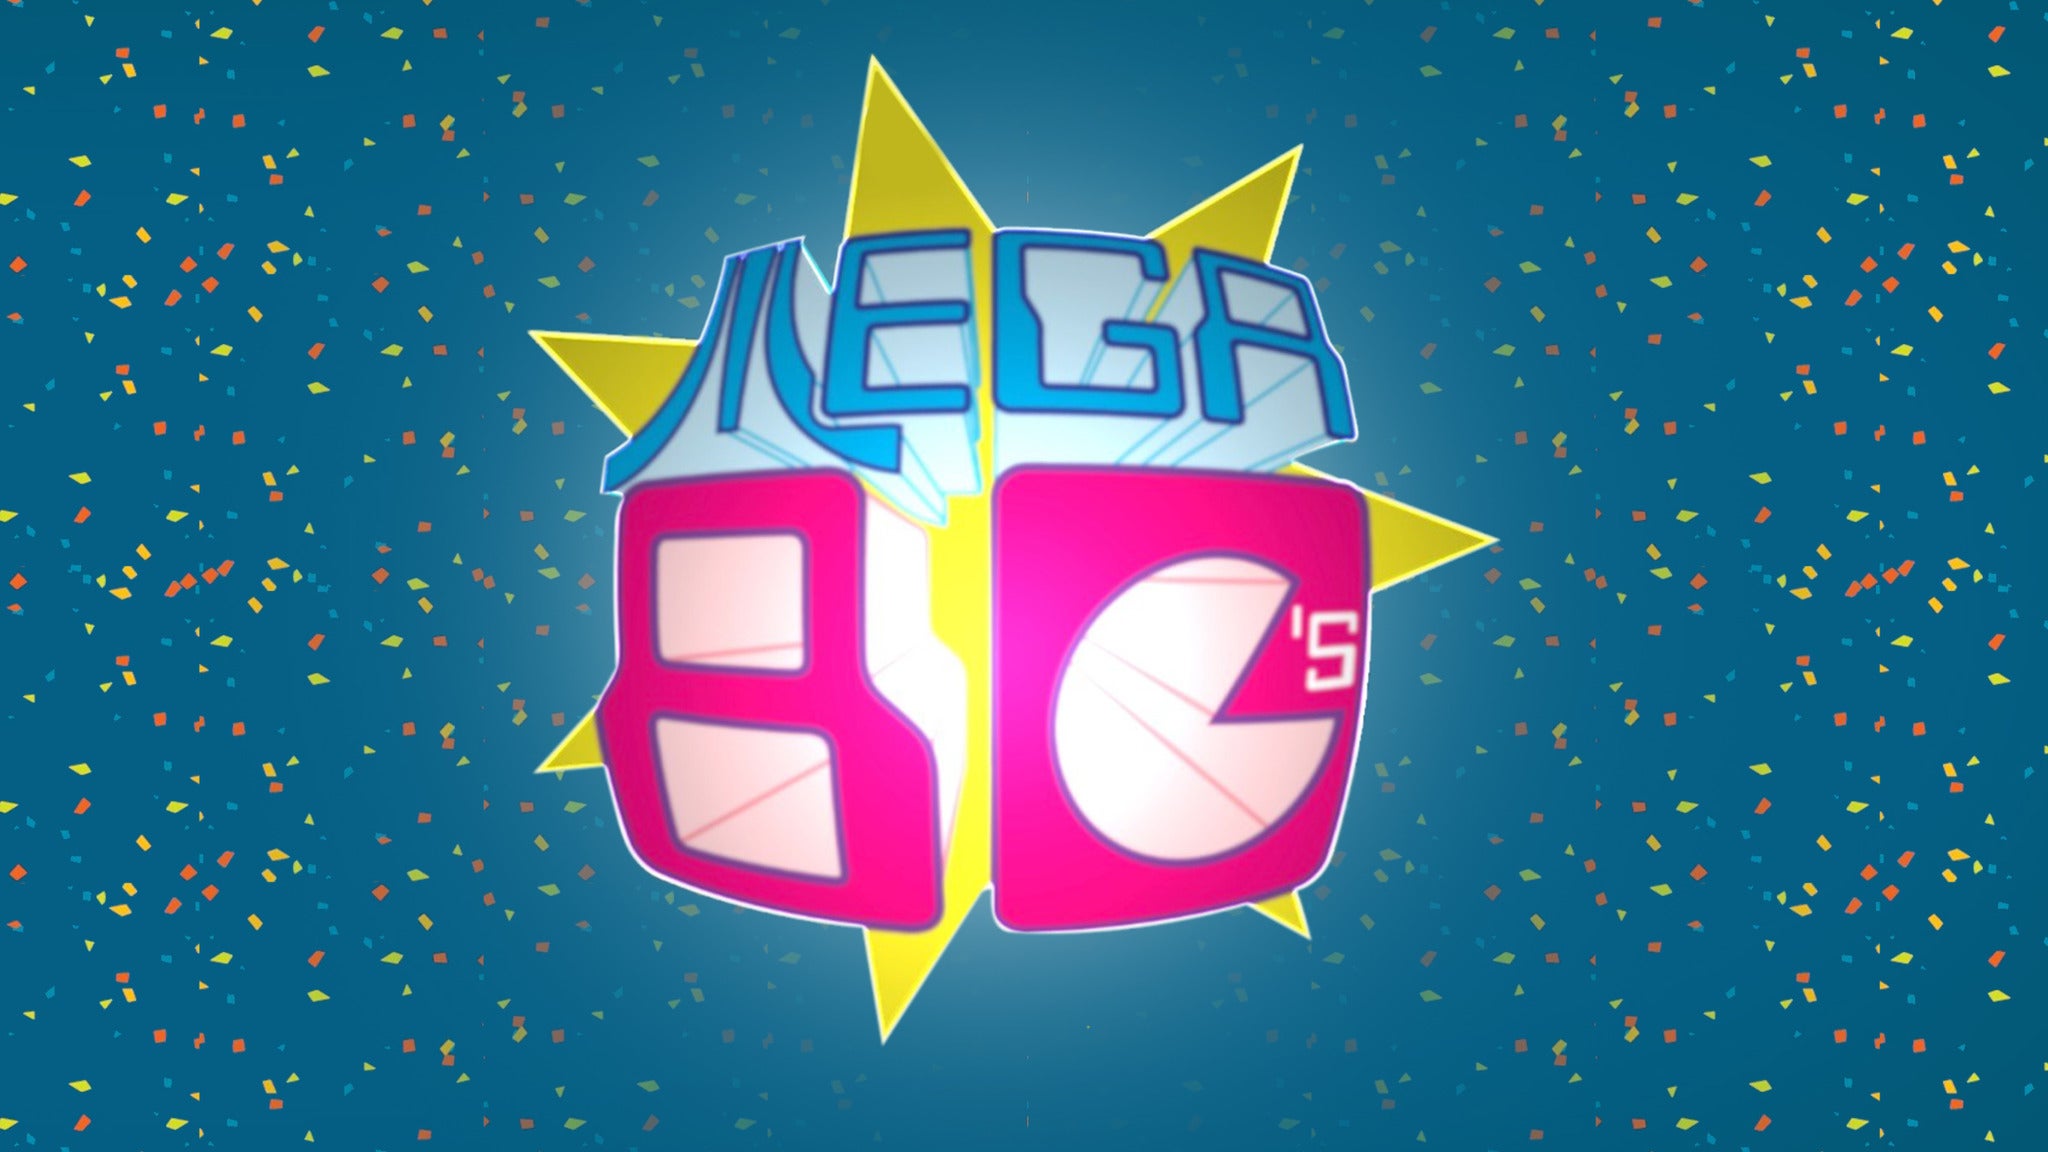 Mega 80's - The Ultimate 80's Retro Party pre-sale password for early tickets in Cleveland